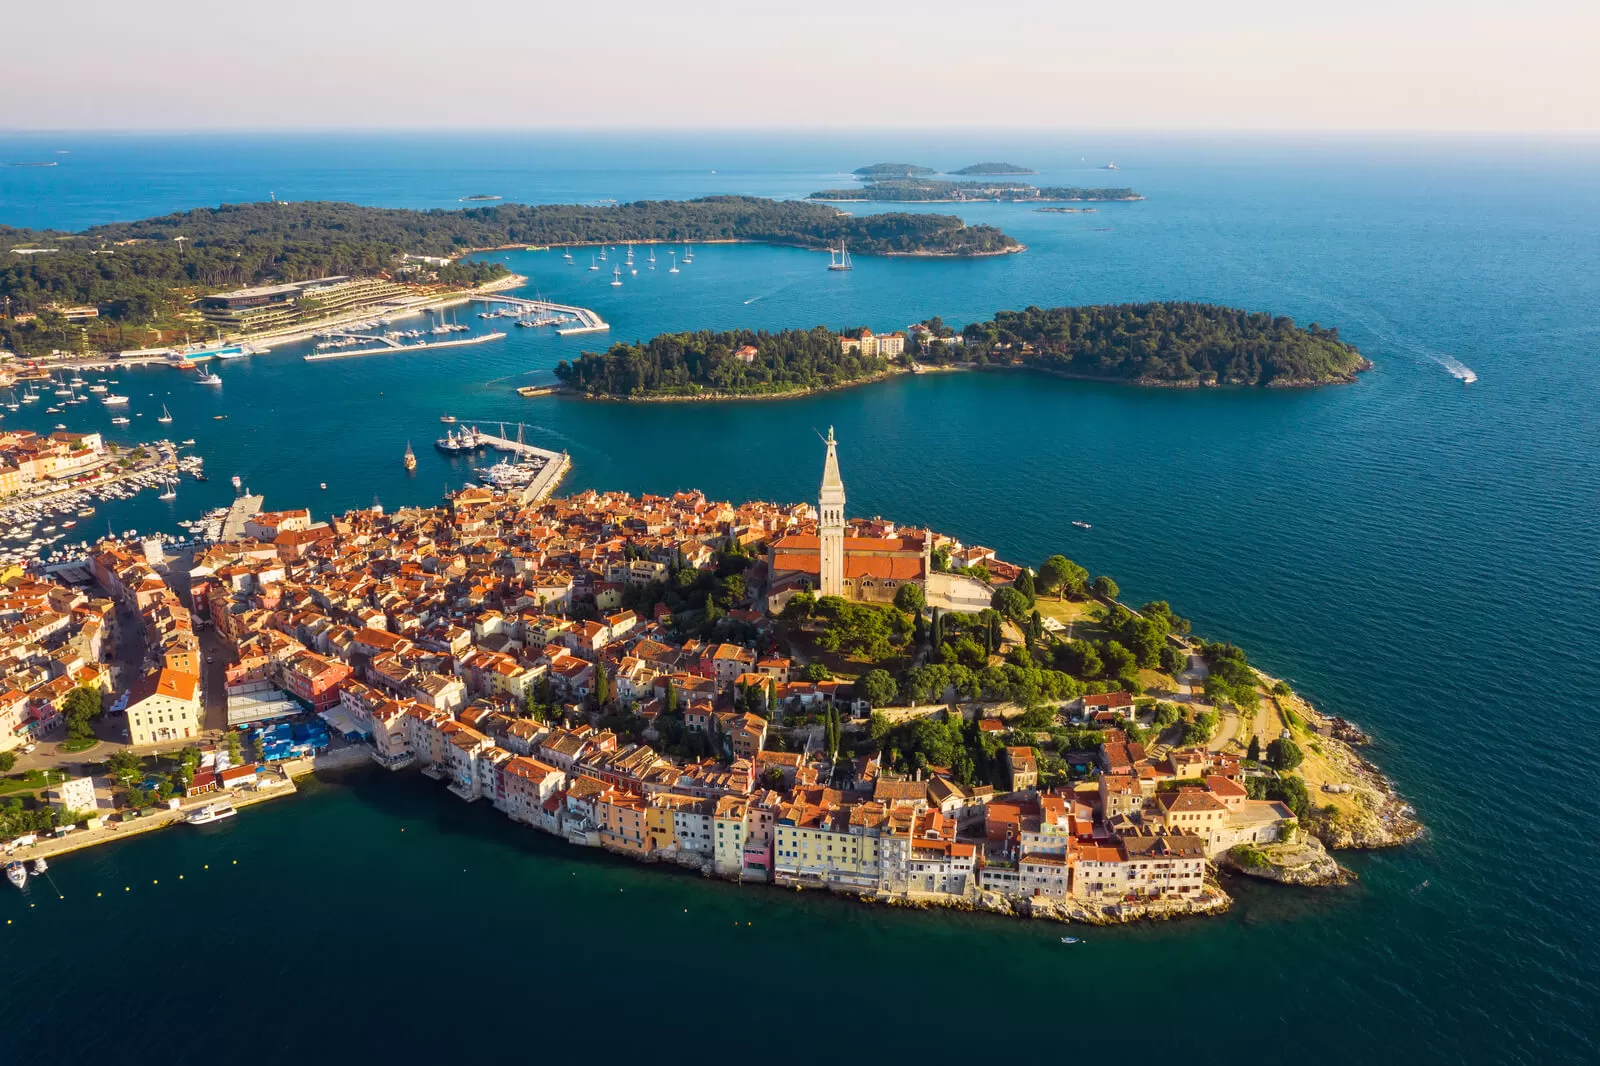 Magical Rovinj with a wonderful old town center and the church of St. Euphemia